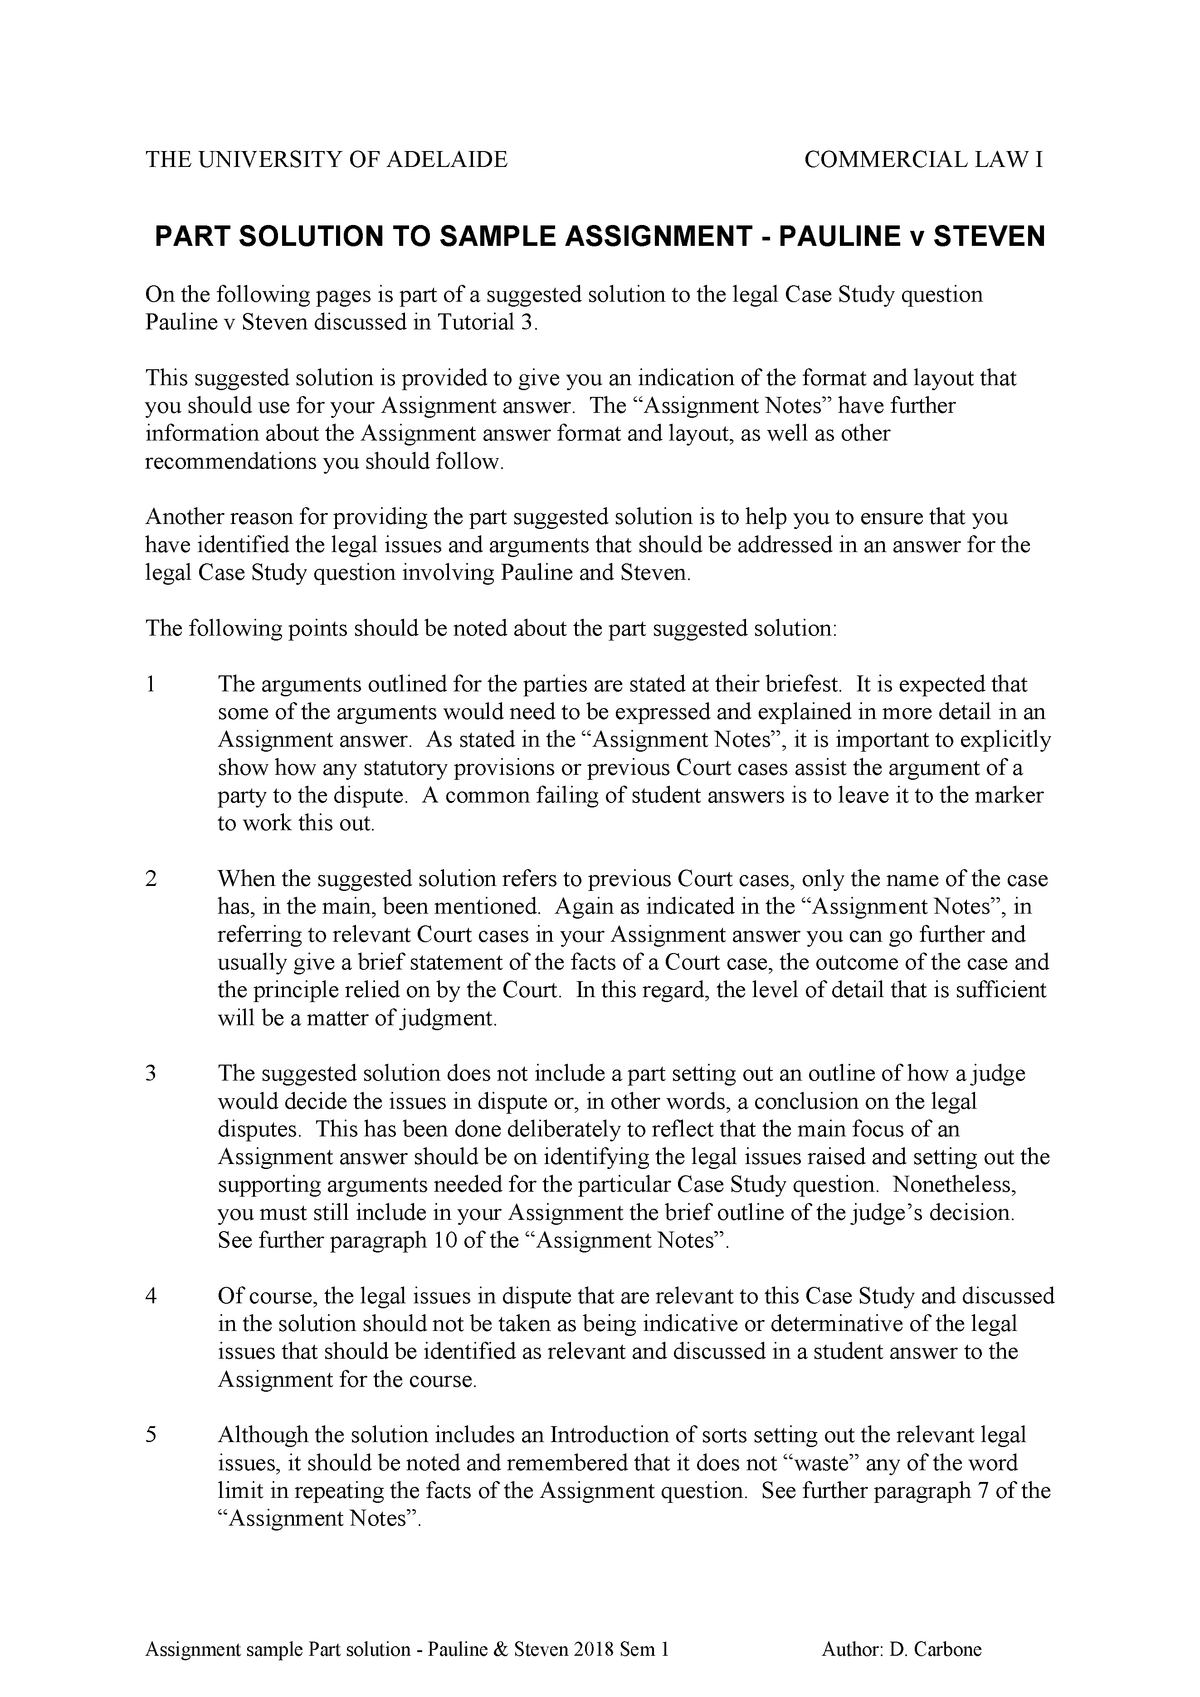 Assignment 2 Legal Issues Case Study Part